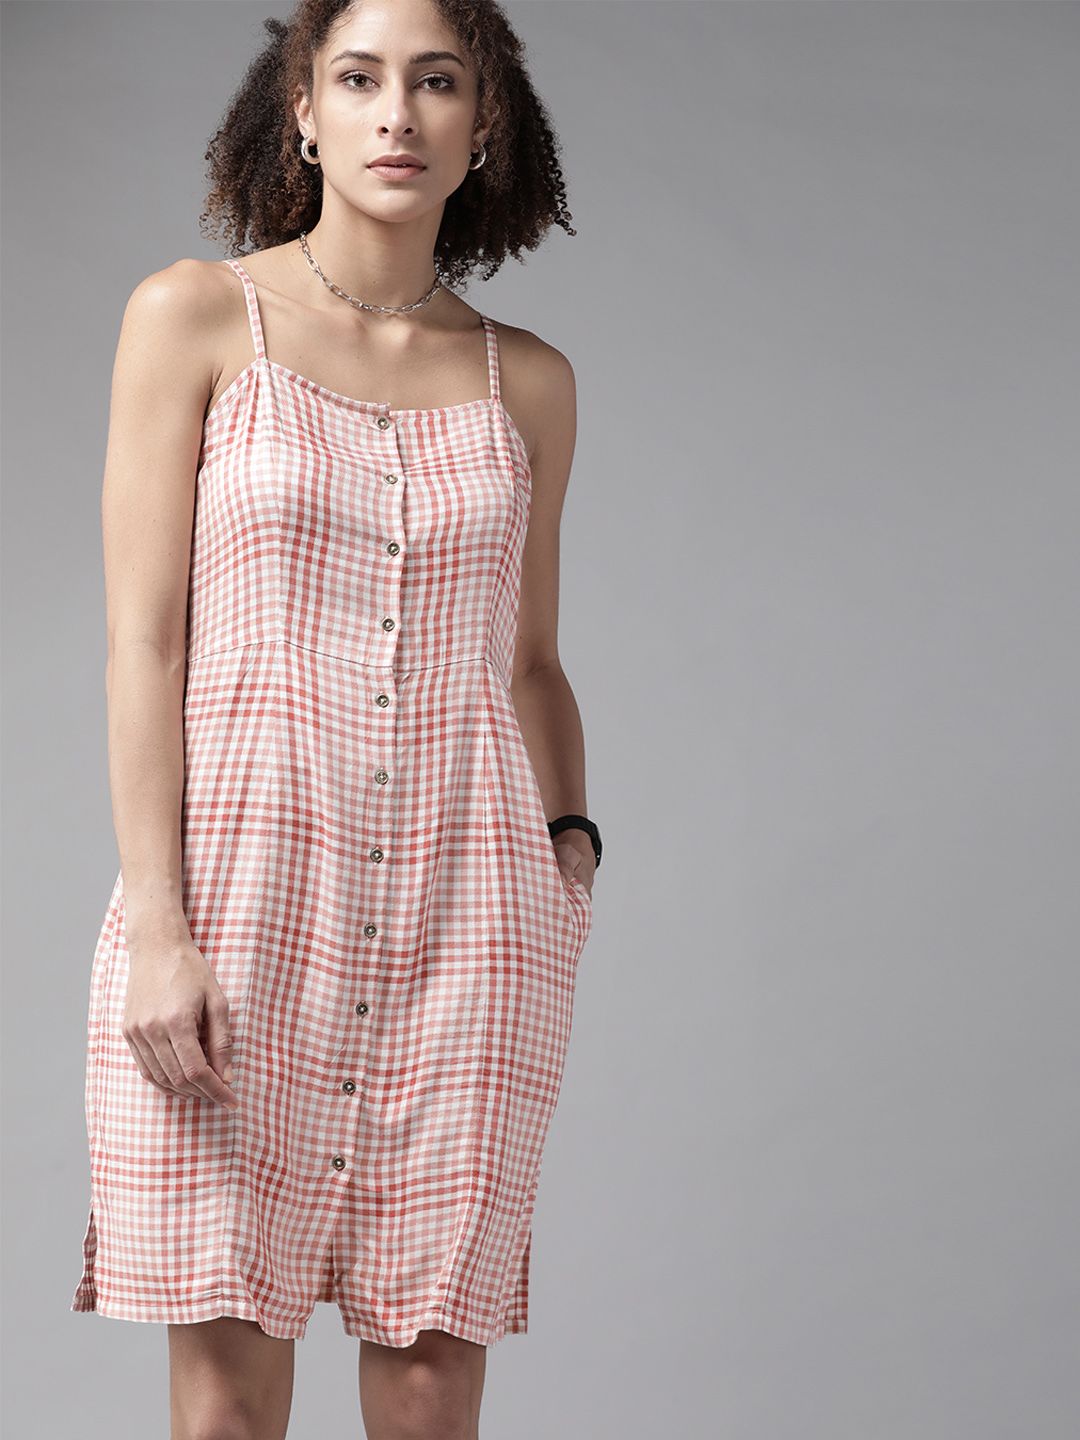 The Roadster Lifestyle Co Beige & Pink Checked Shoulder Straps Shirt Dress Price in India